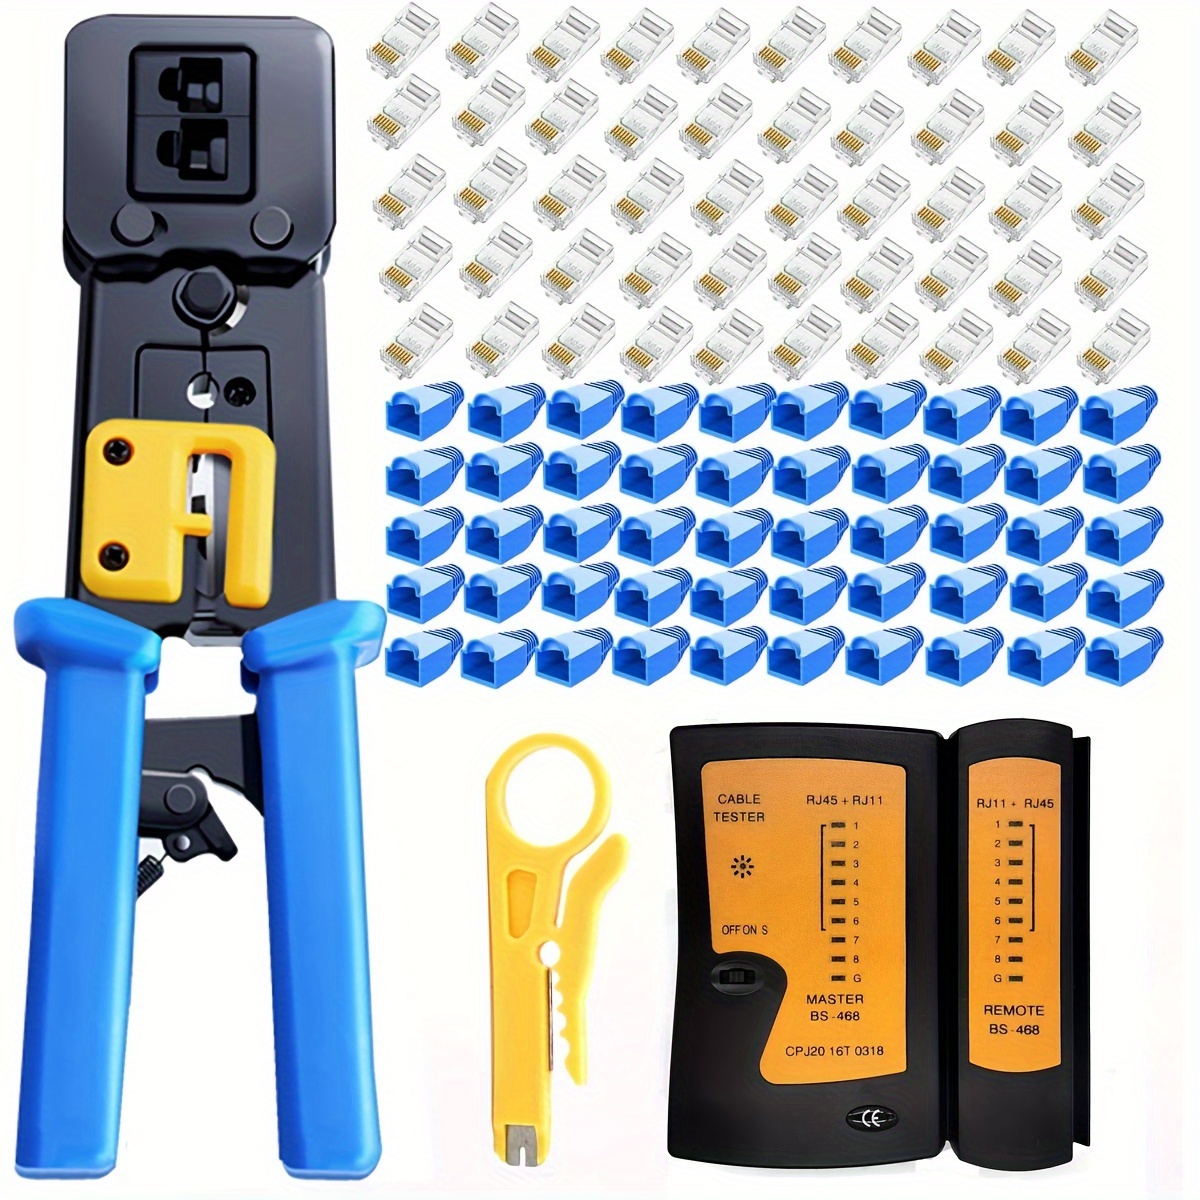 

Rj45 Crimper Tool Set For Cat5e/cat6/cat5, High Carbon Steel Network Cable Crimping With 50 Pass-through Connectors, 50 Covers, Stripper & Tester Kit